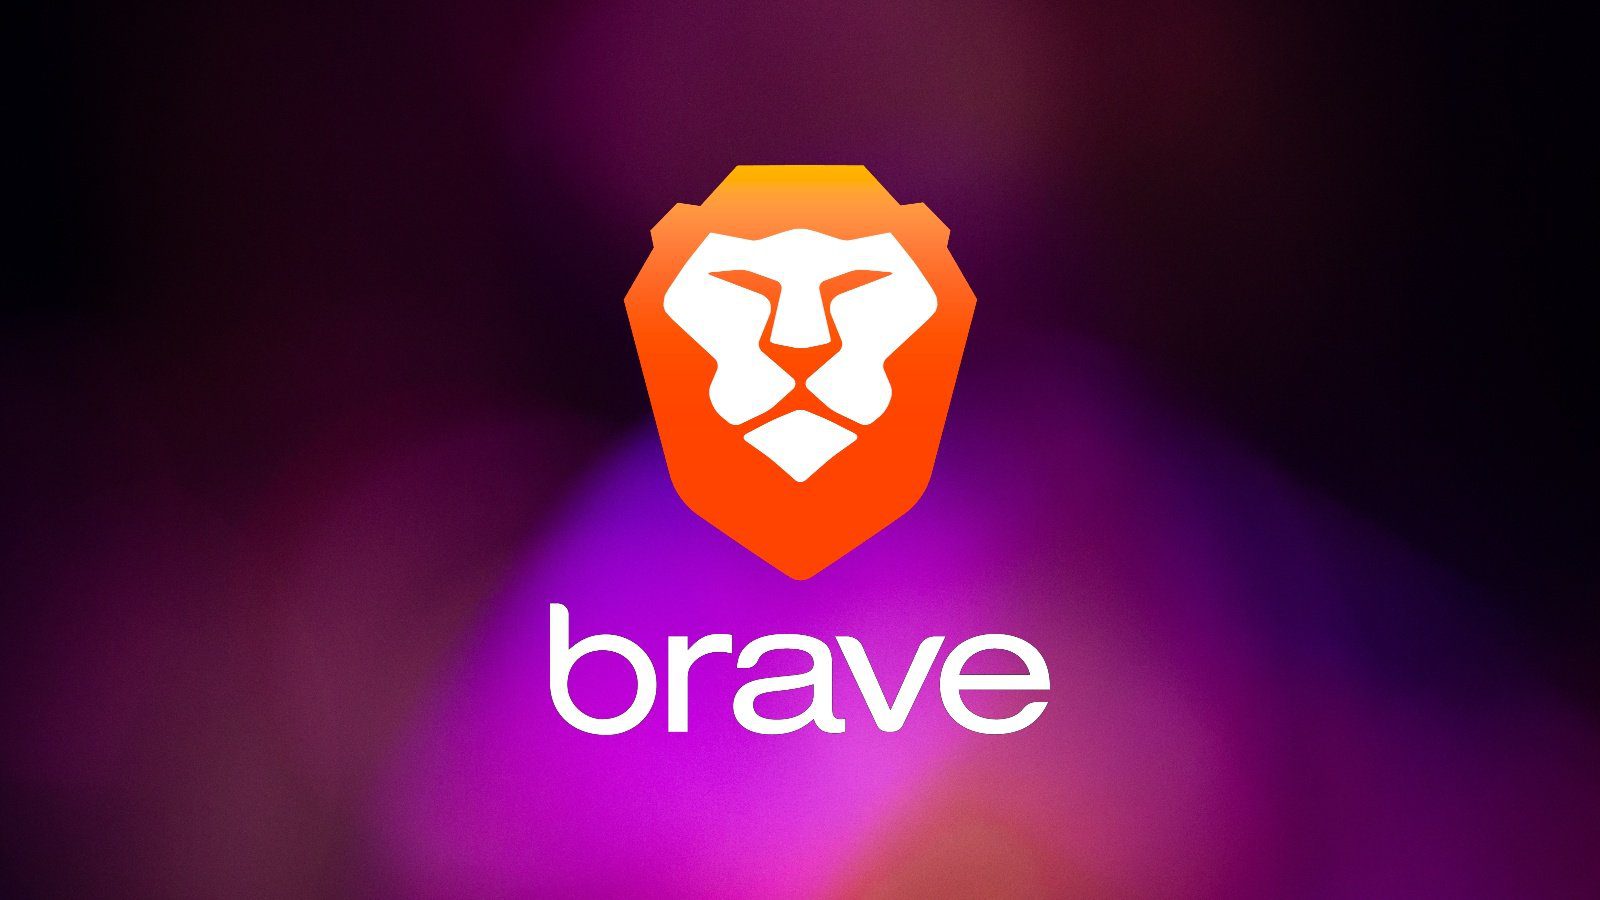 Brave unveils new “Forgetful Browsing” anti-tracking feature – Source: www.bleepingcomputer.com